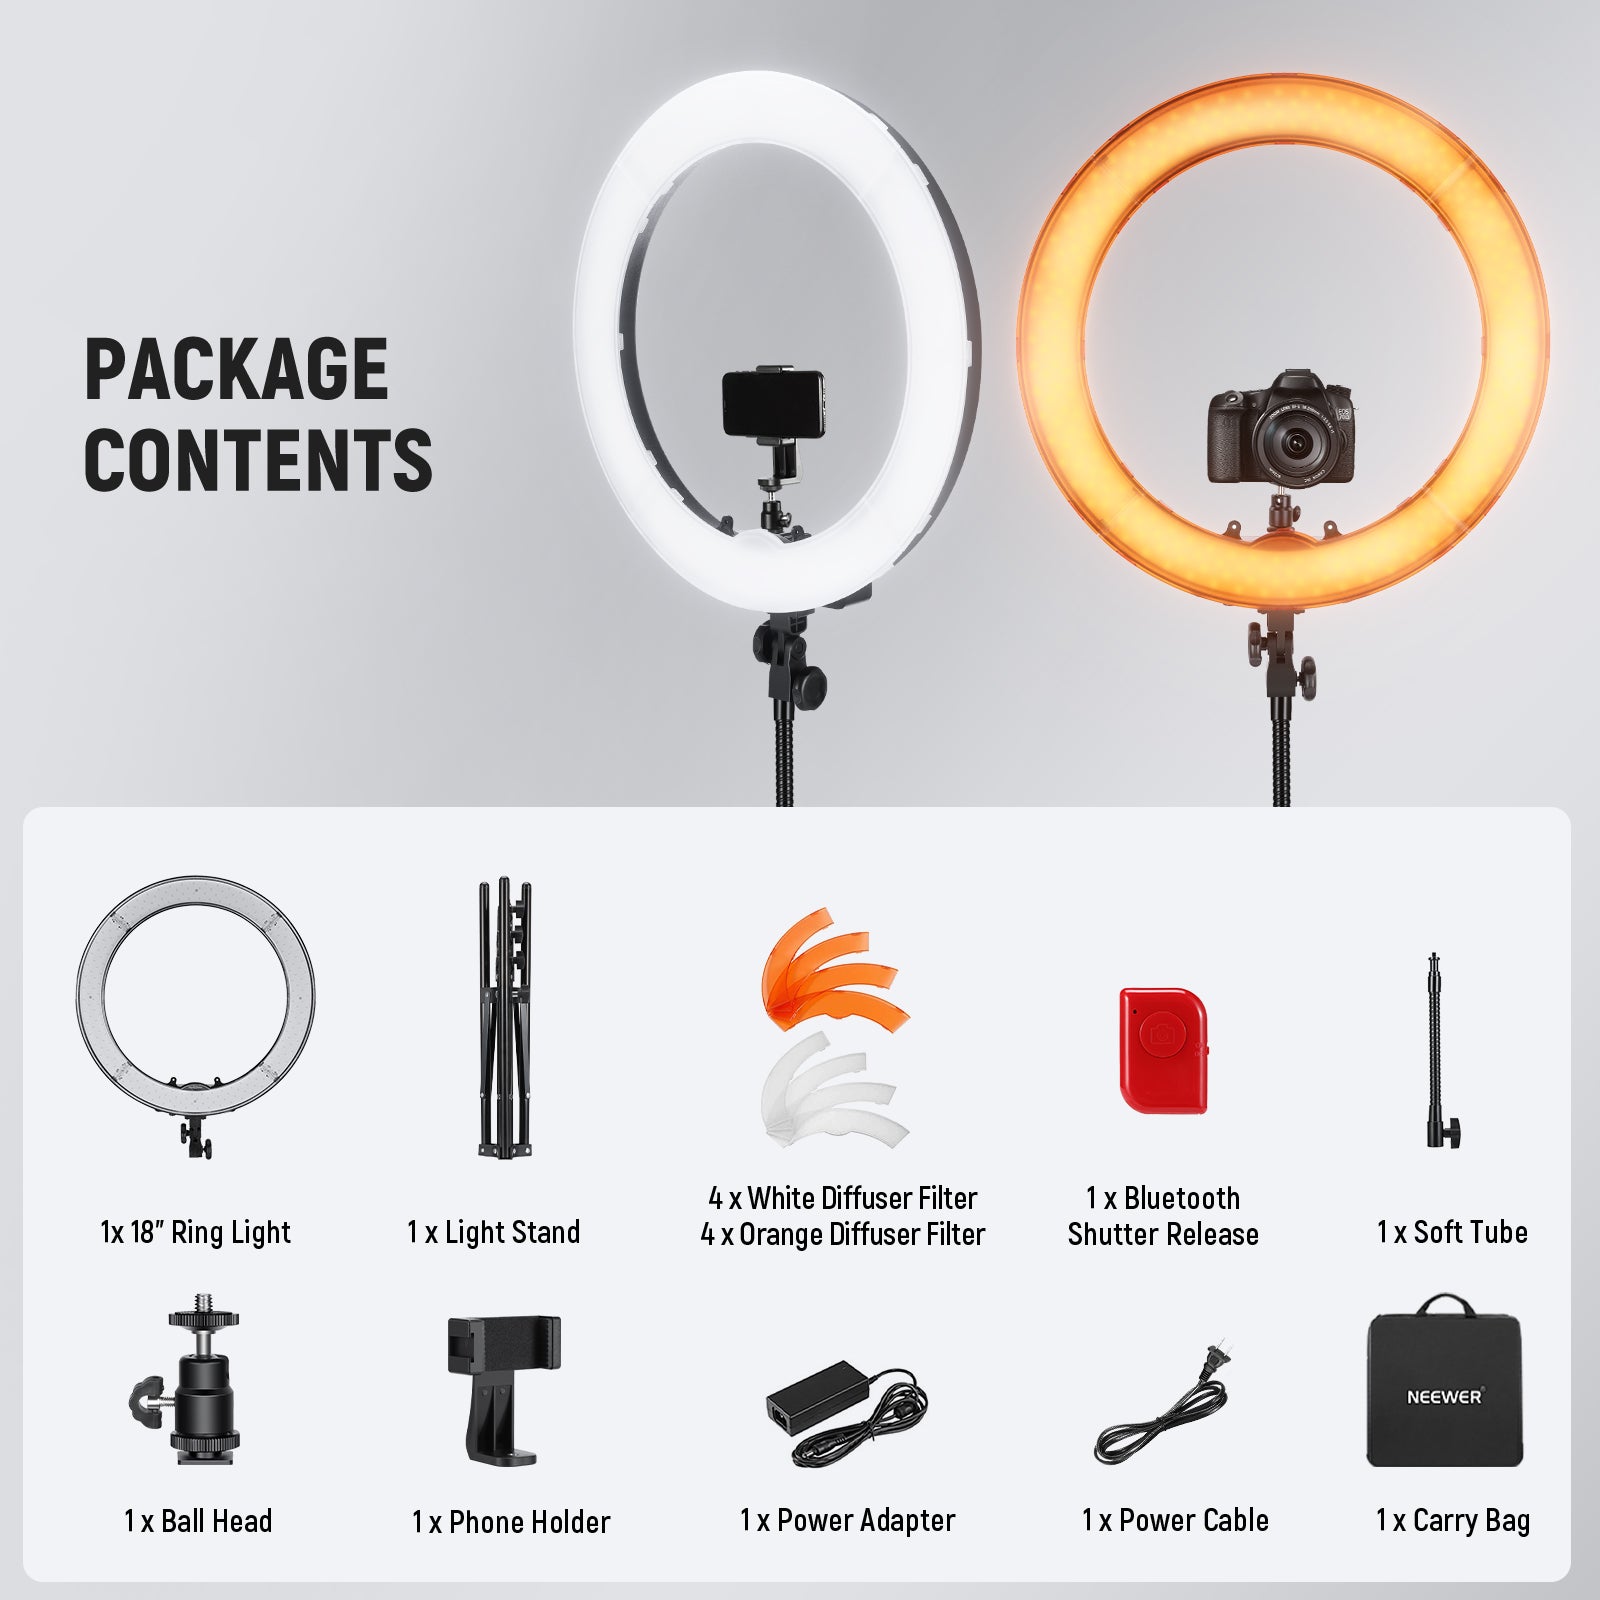 Neewer 20-inch LED Ring Light Kit: (1)44W Dimmable Bi-color Circle Light  (1)2M Pro Light Stand(1)Ball Head(1)Phone Holder(2)Li-ion Battery(1)USB  Charger for Portrait Photography Video Make-up Selfie 